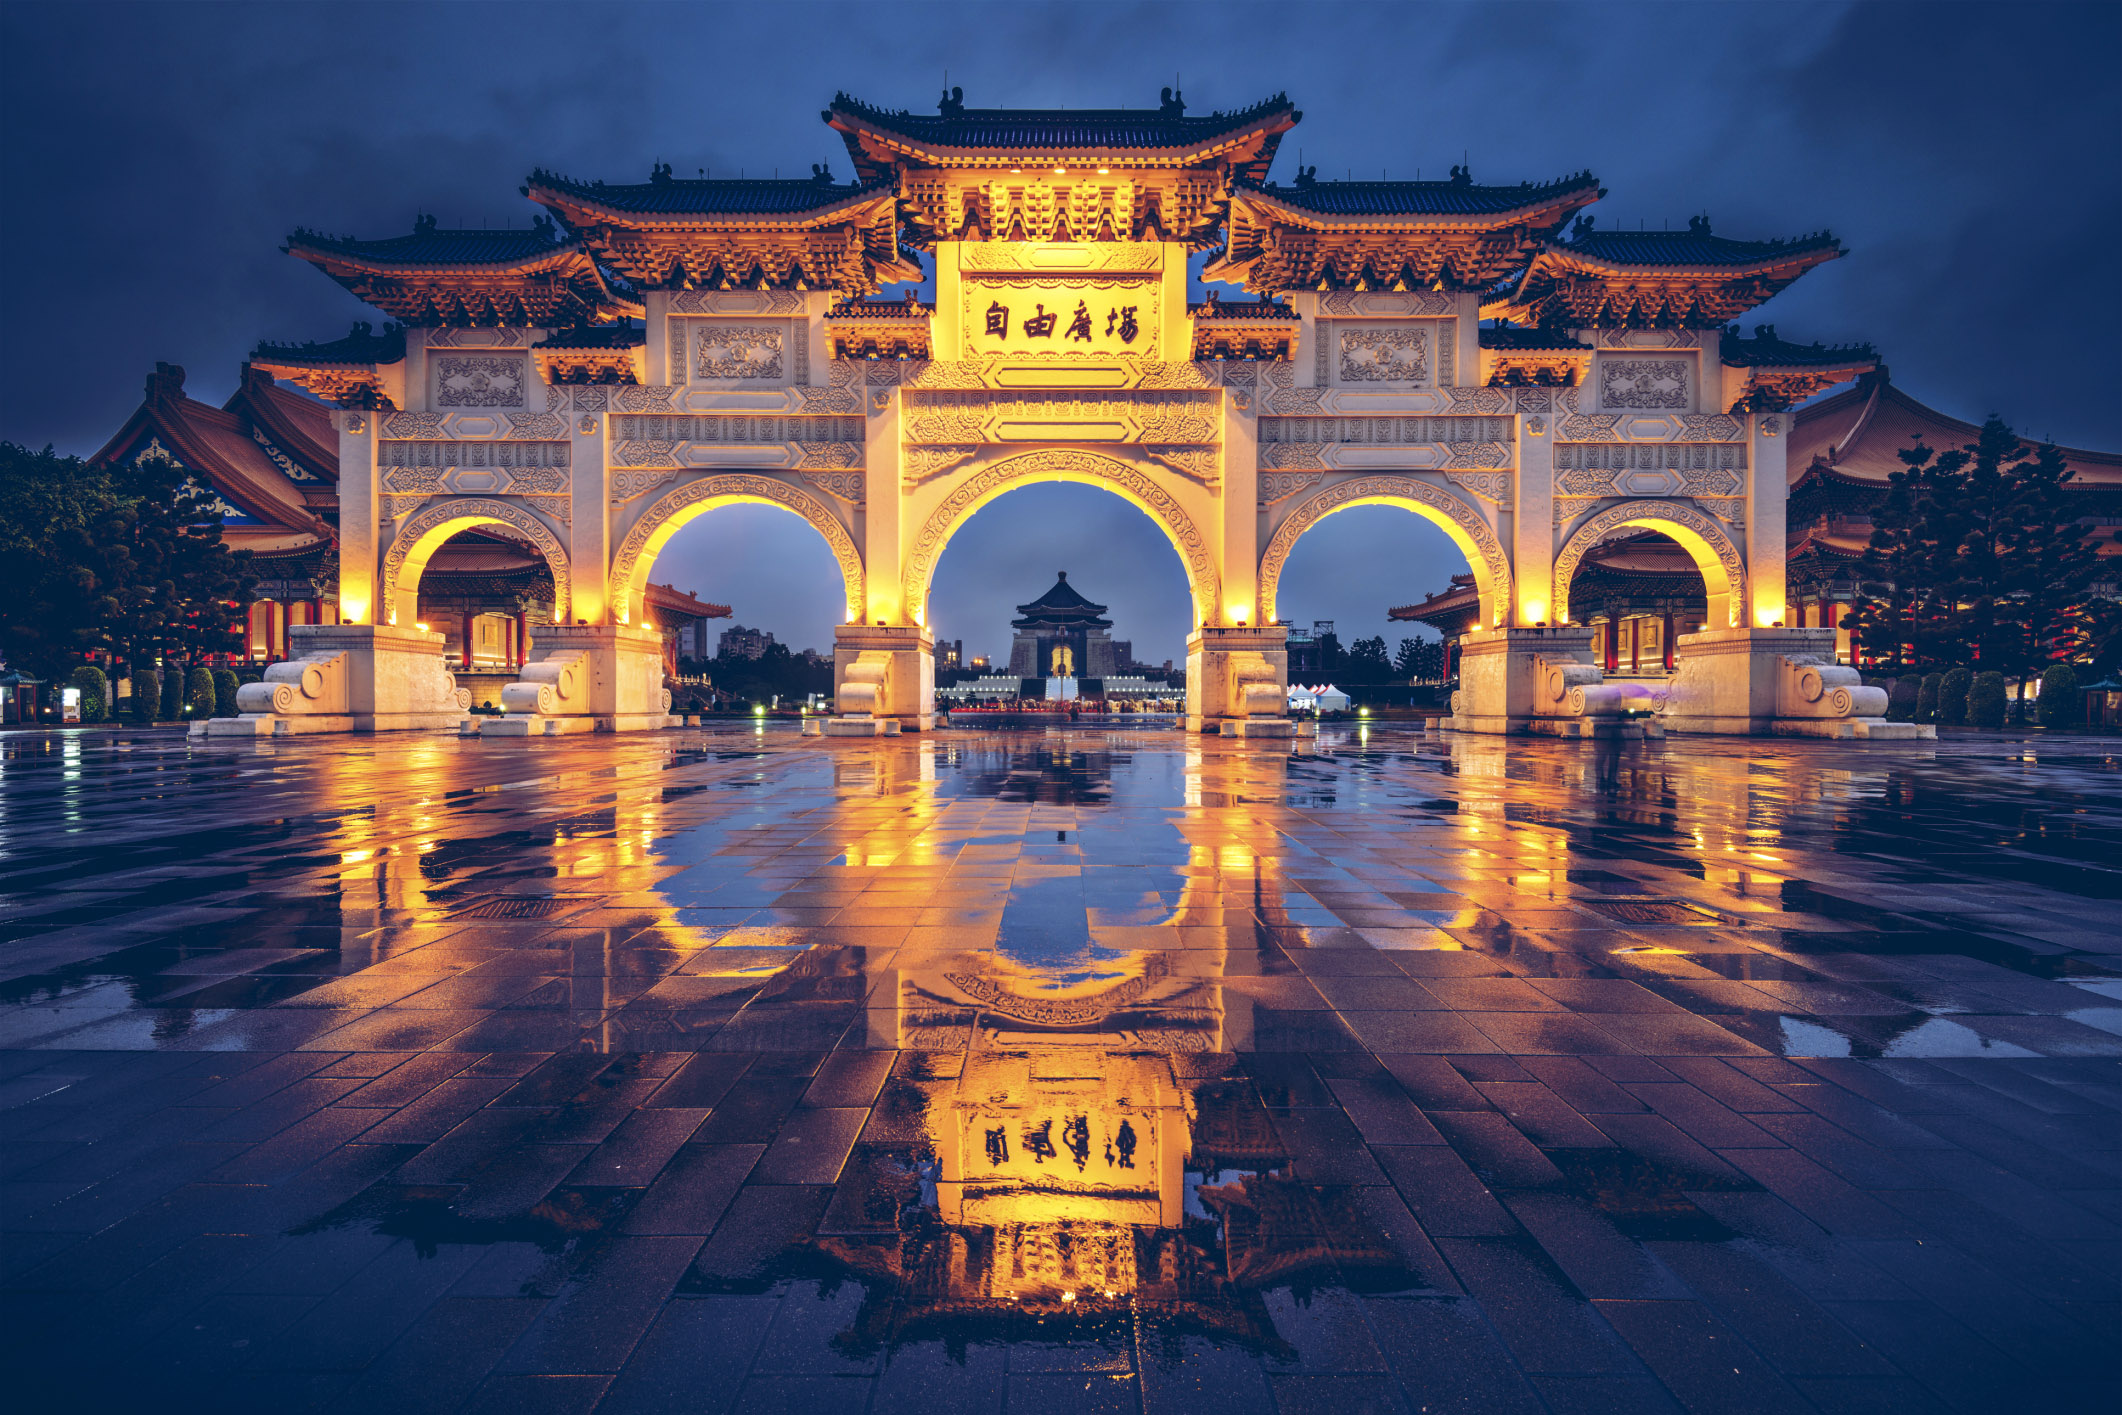 Taiwan arches reflecting off of rain puddles on its patio